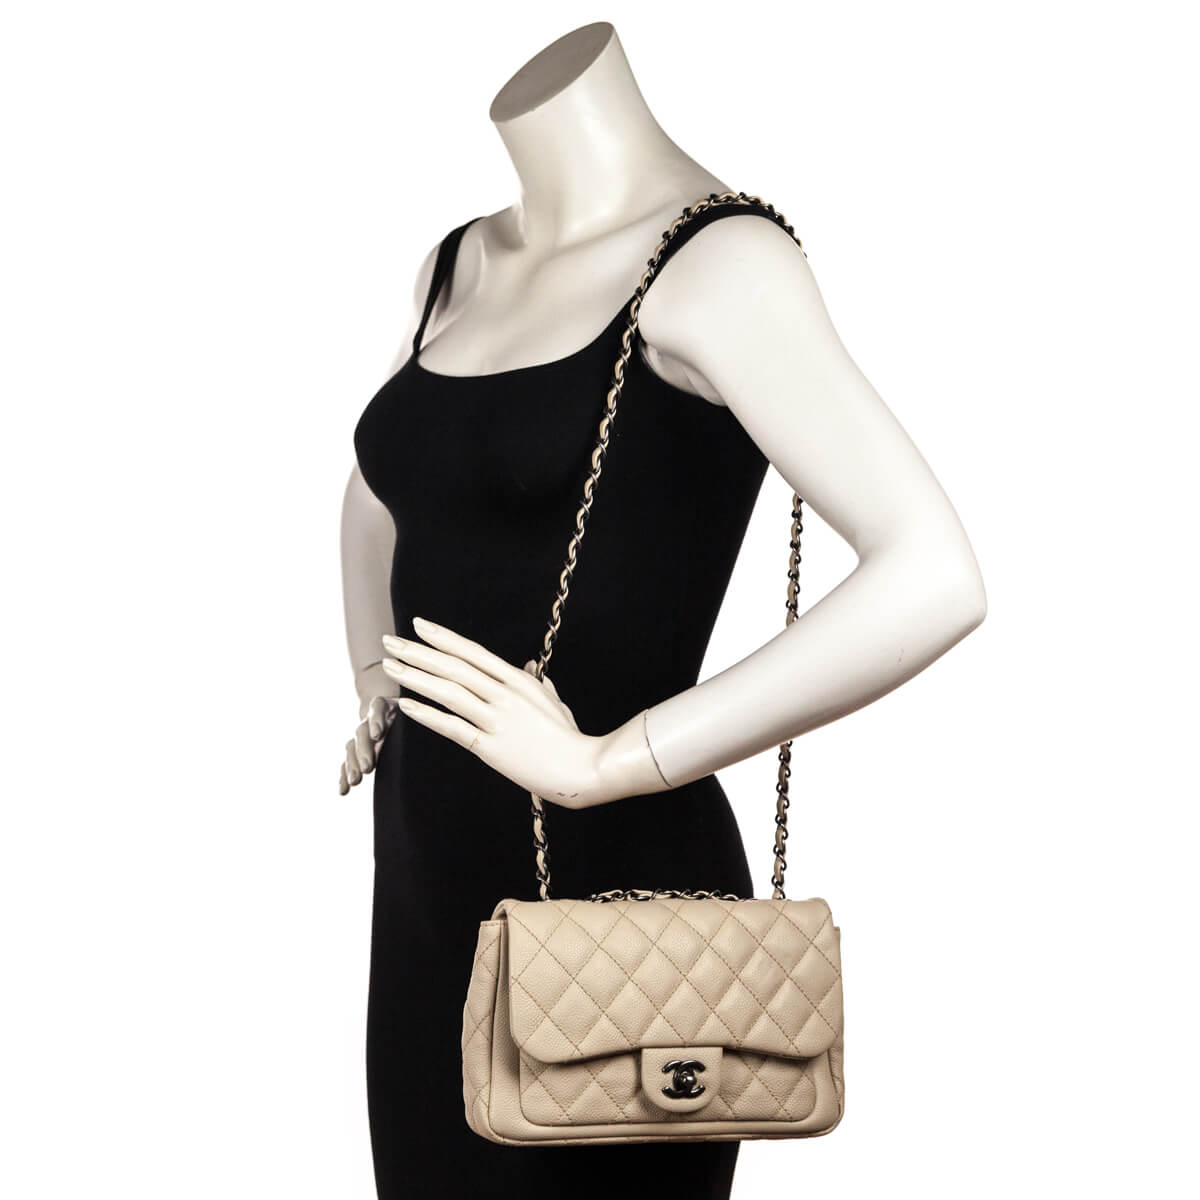 Chanel Beige Quilted Caviar Small Single Flap Bag - Love that Bag etc - Preowned Authentic Designer Handbags & Preloved Fashions